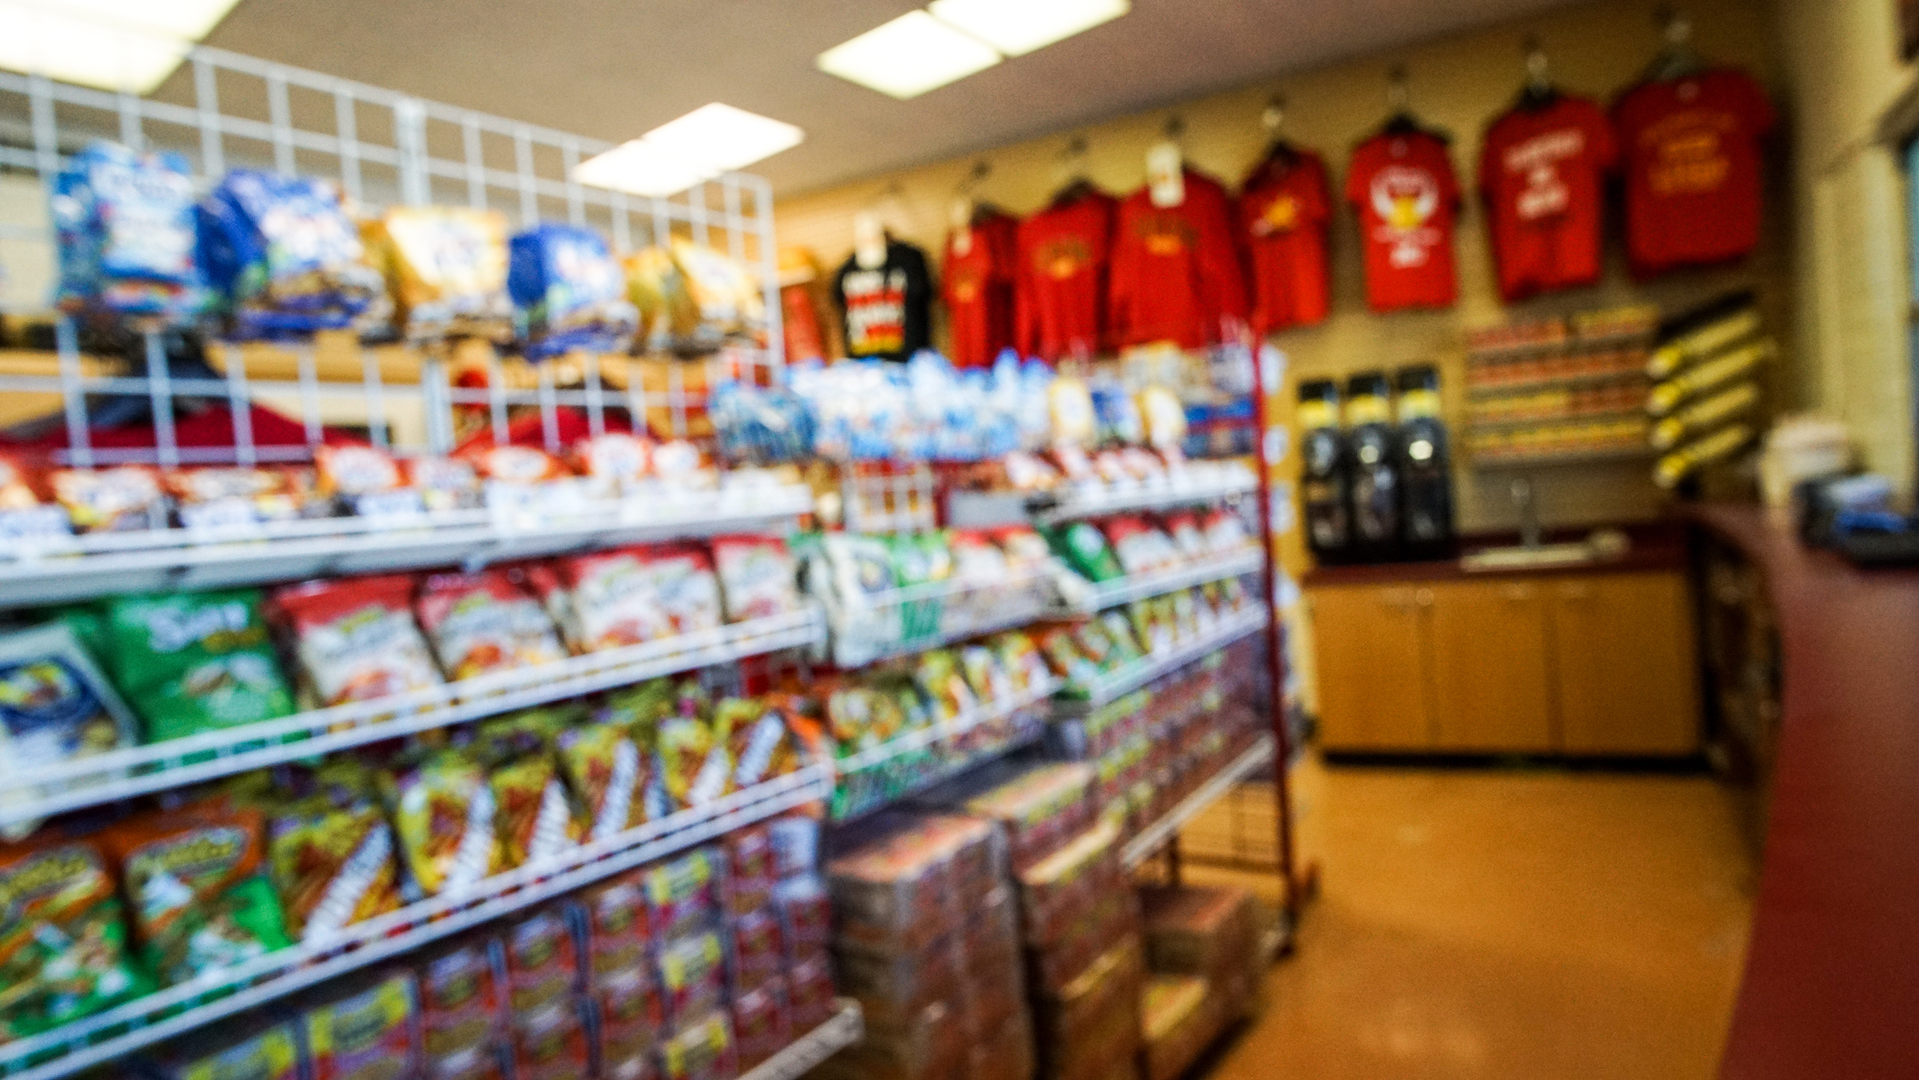 How to Choose Products for Your Student Store